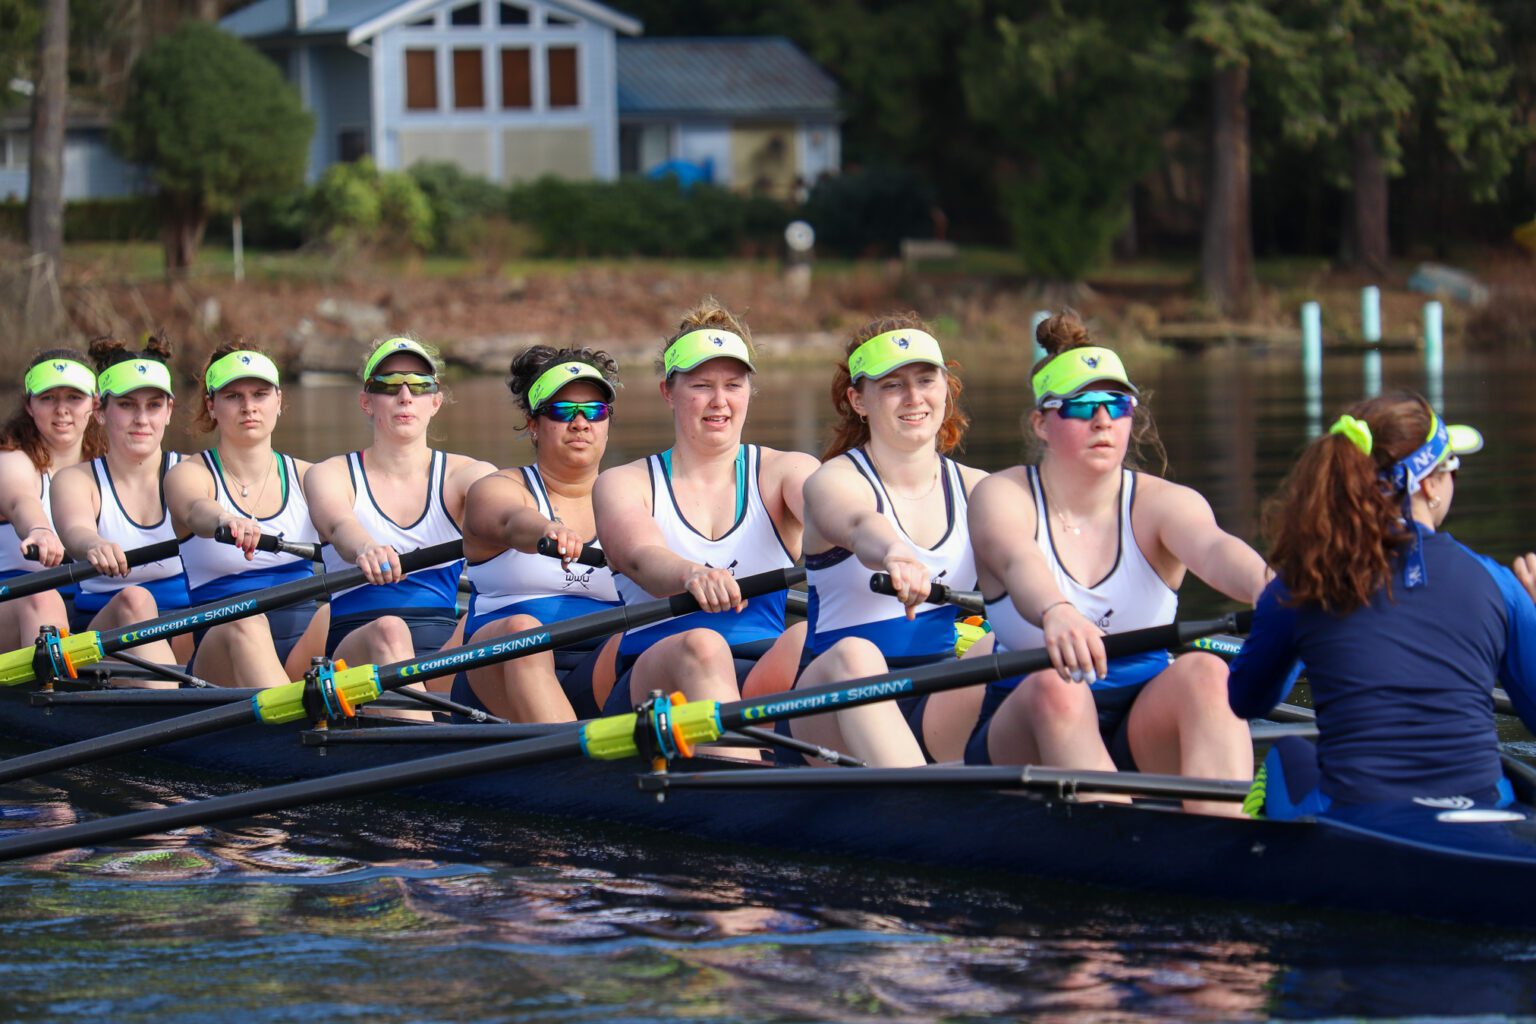 The Western Washington University women's rowing team was one of six crew teams selected to compete for the Division II national title May 27-28 in Sarasota